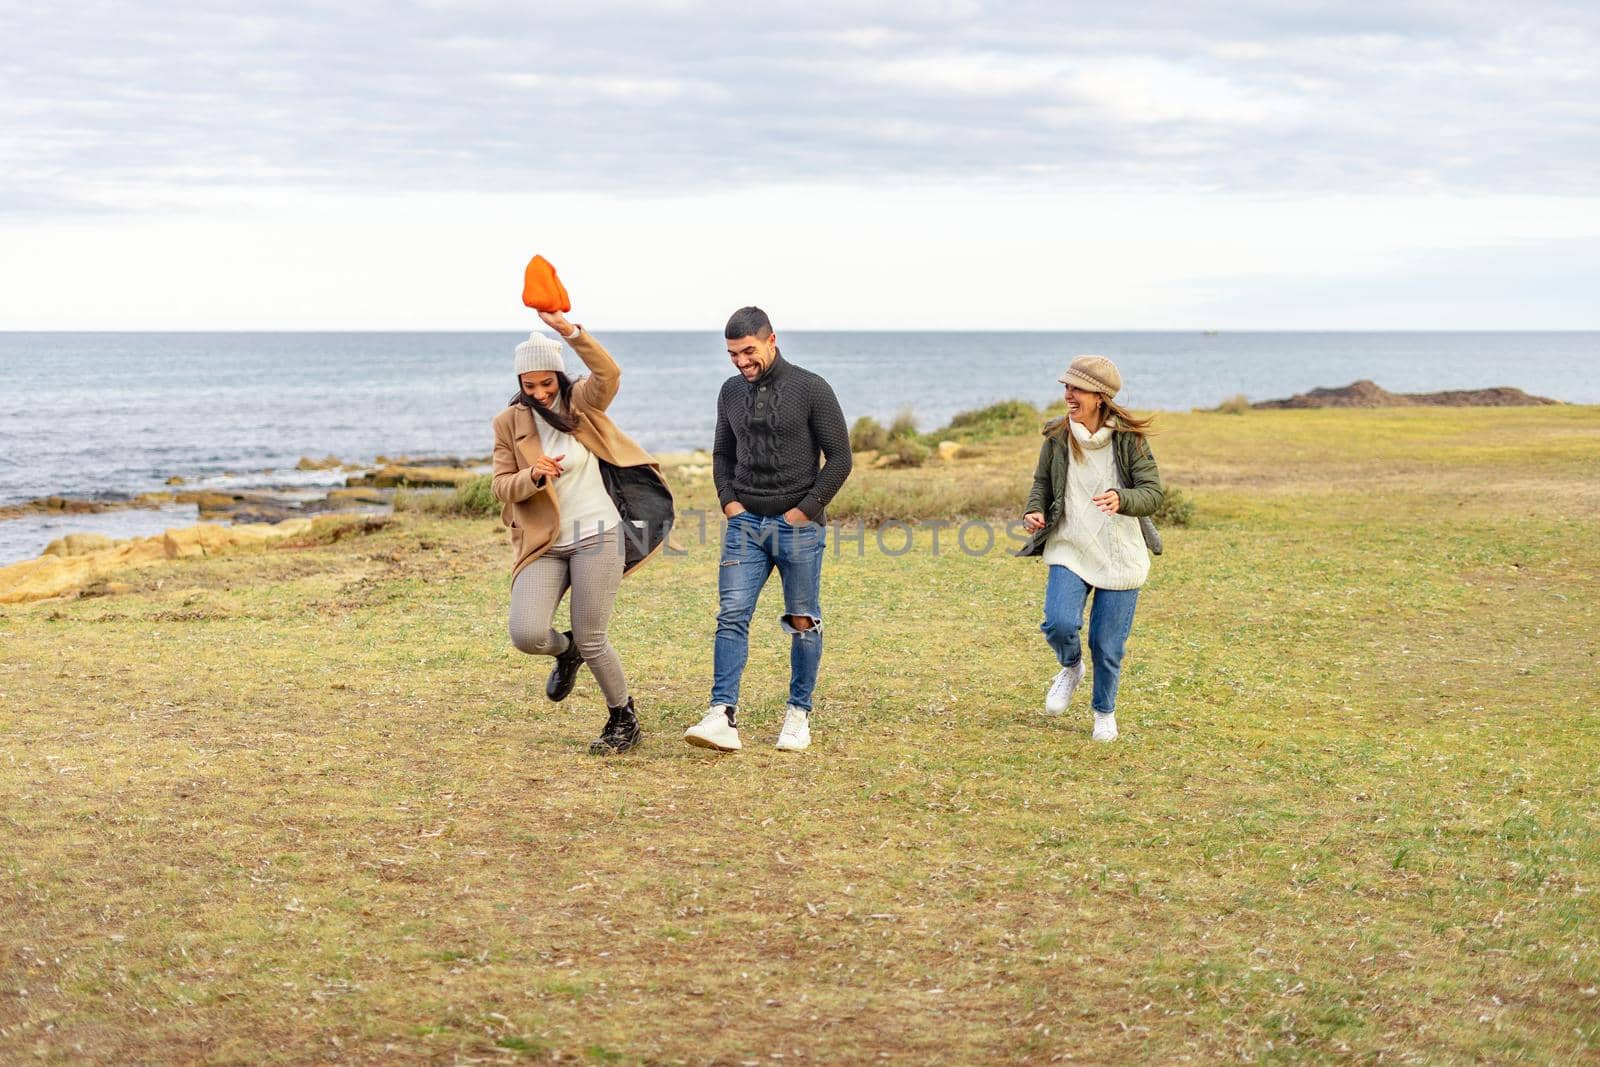 Three mixed-race carefree friends running outdoor joking each other - Millennial people having fun on a meadow near sea smiling in winter vacation enjoying nature in ocean resort wearing clothing by robbyfontanesi